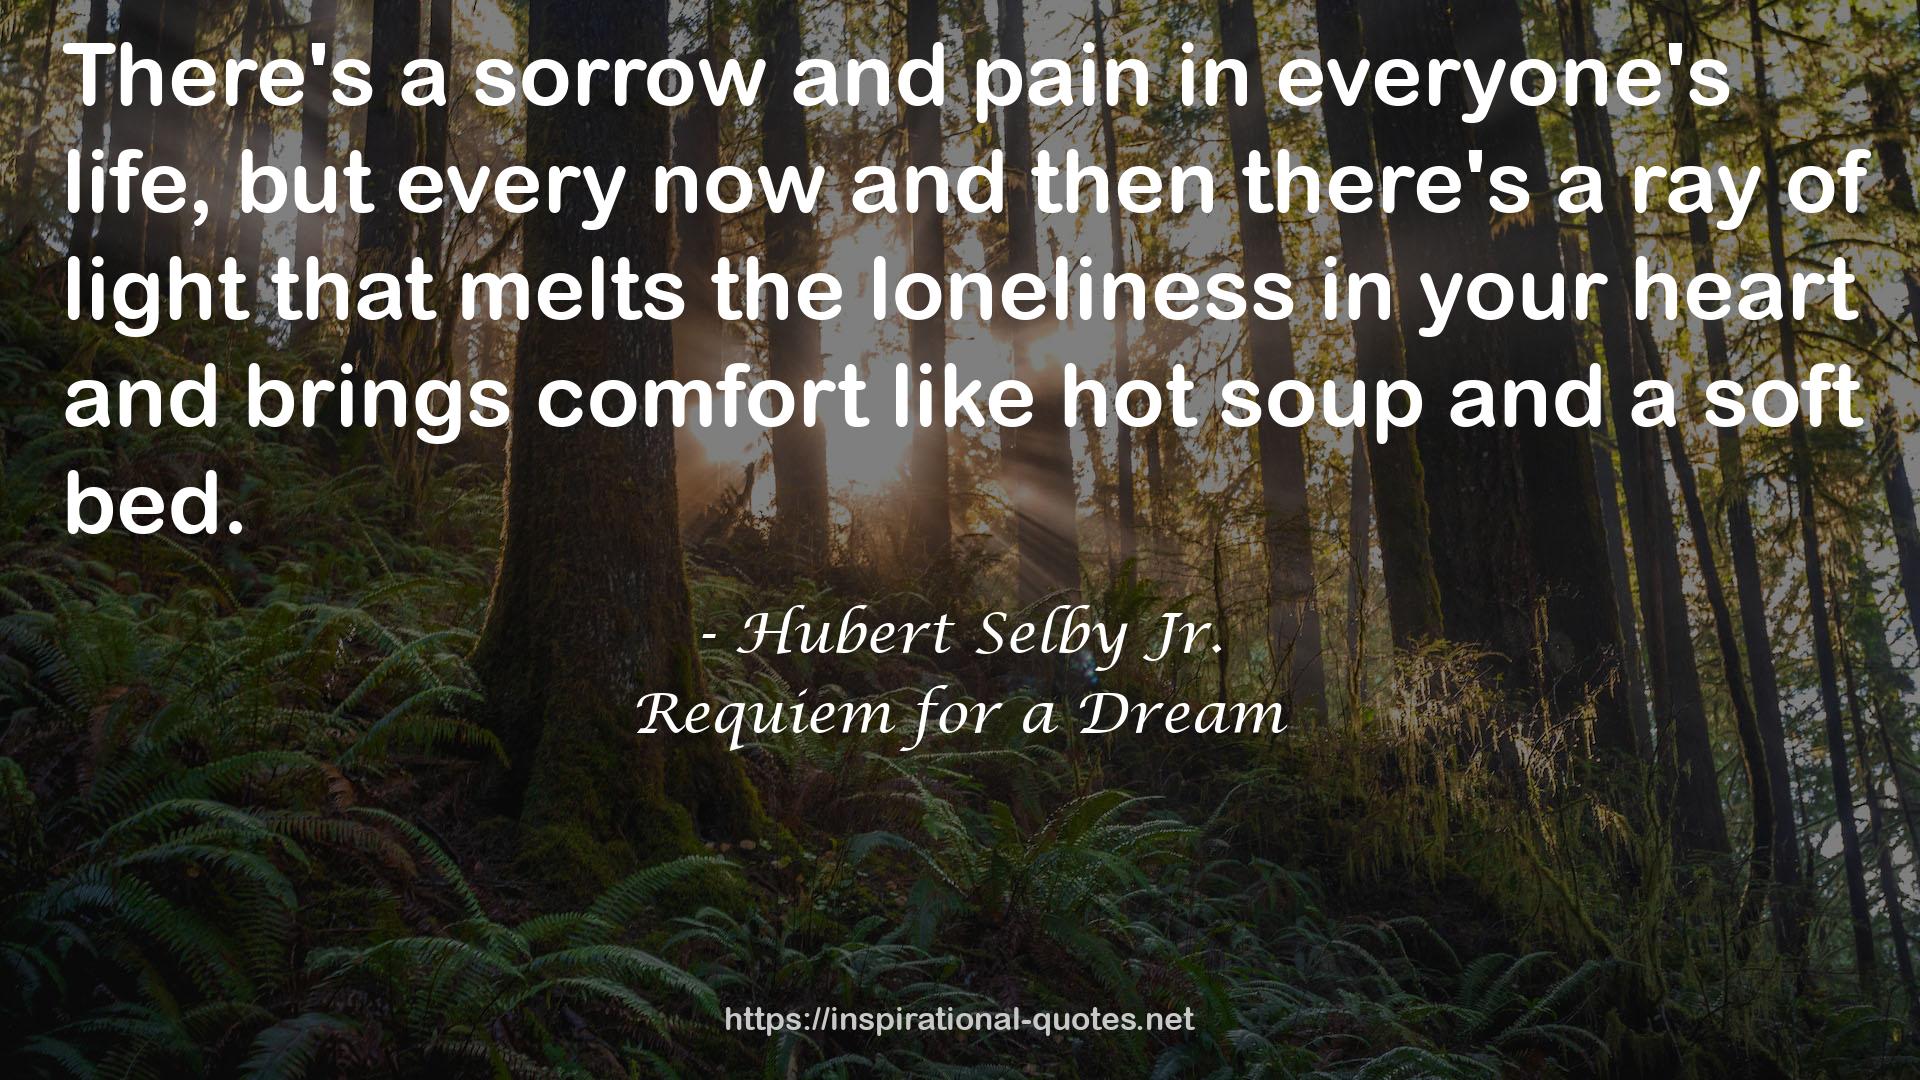 a sorrow  QUOTES